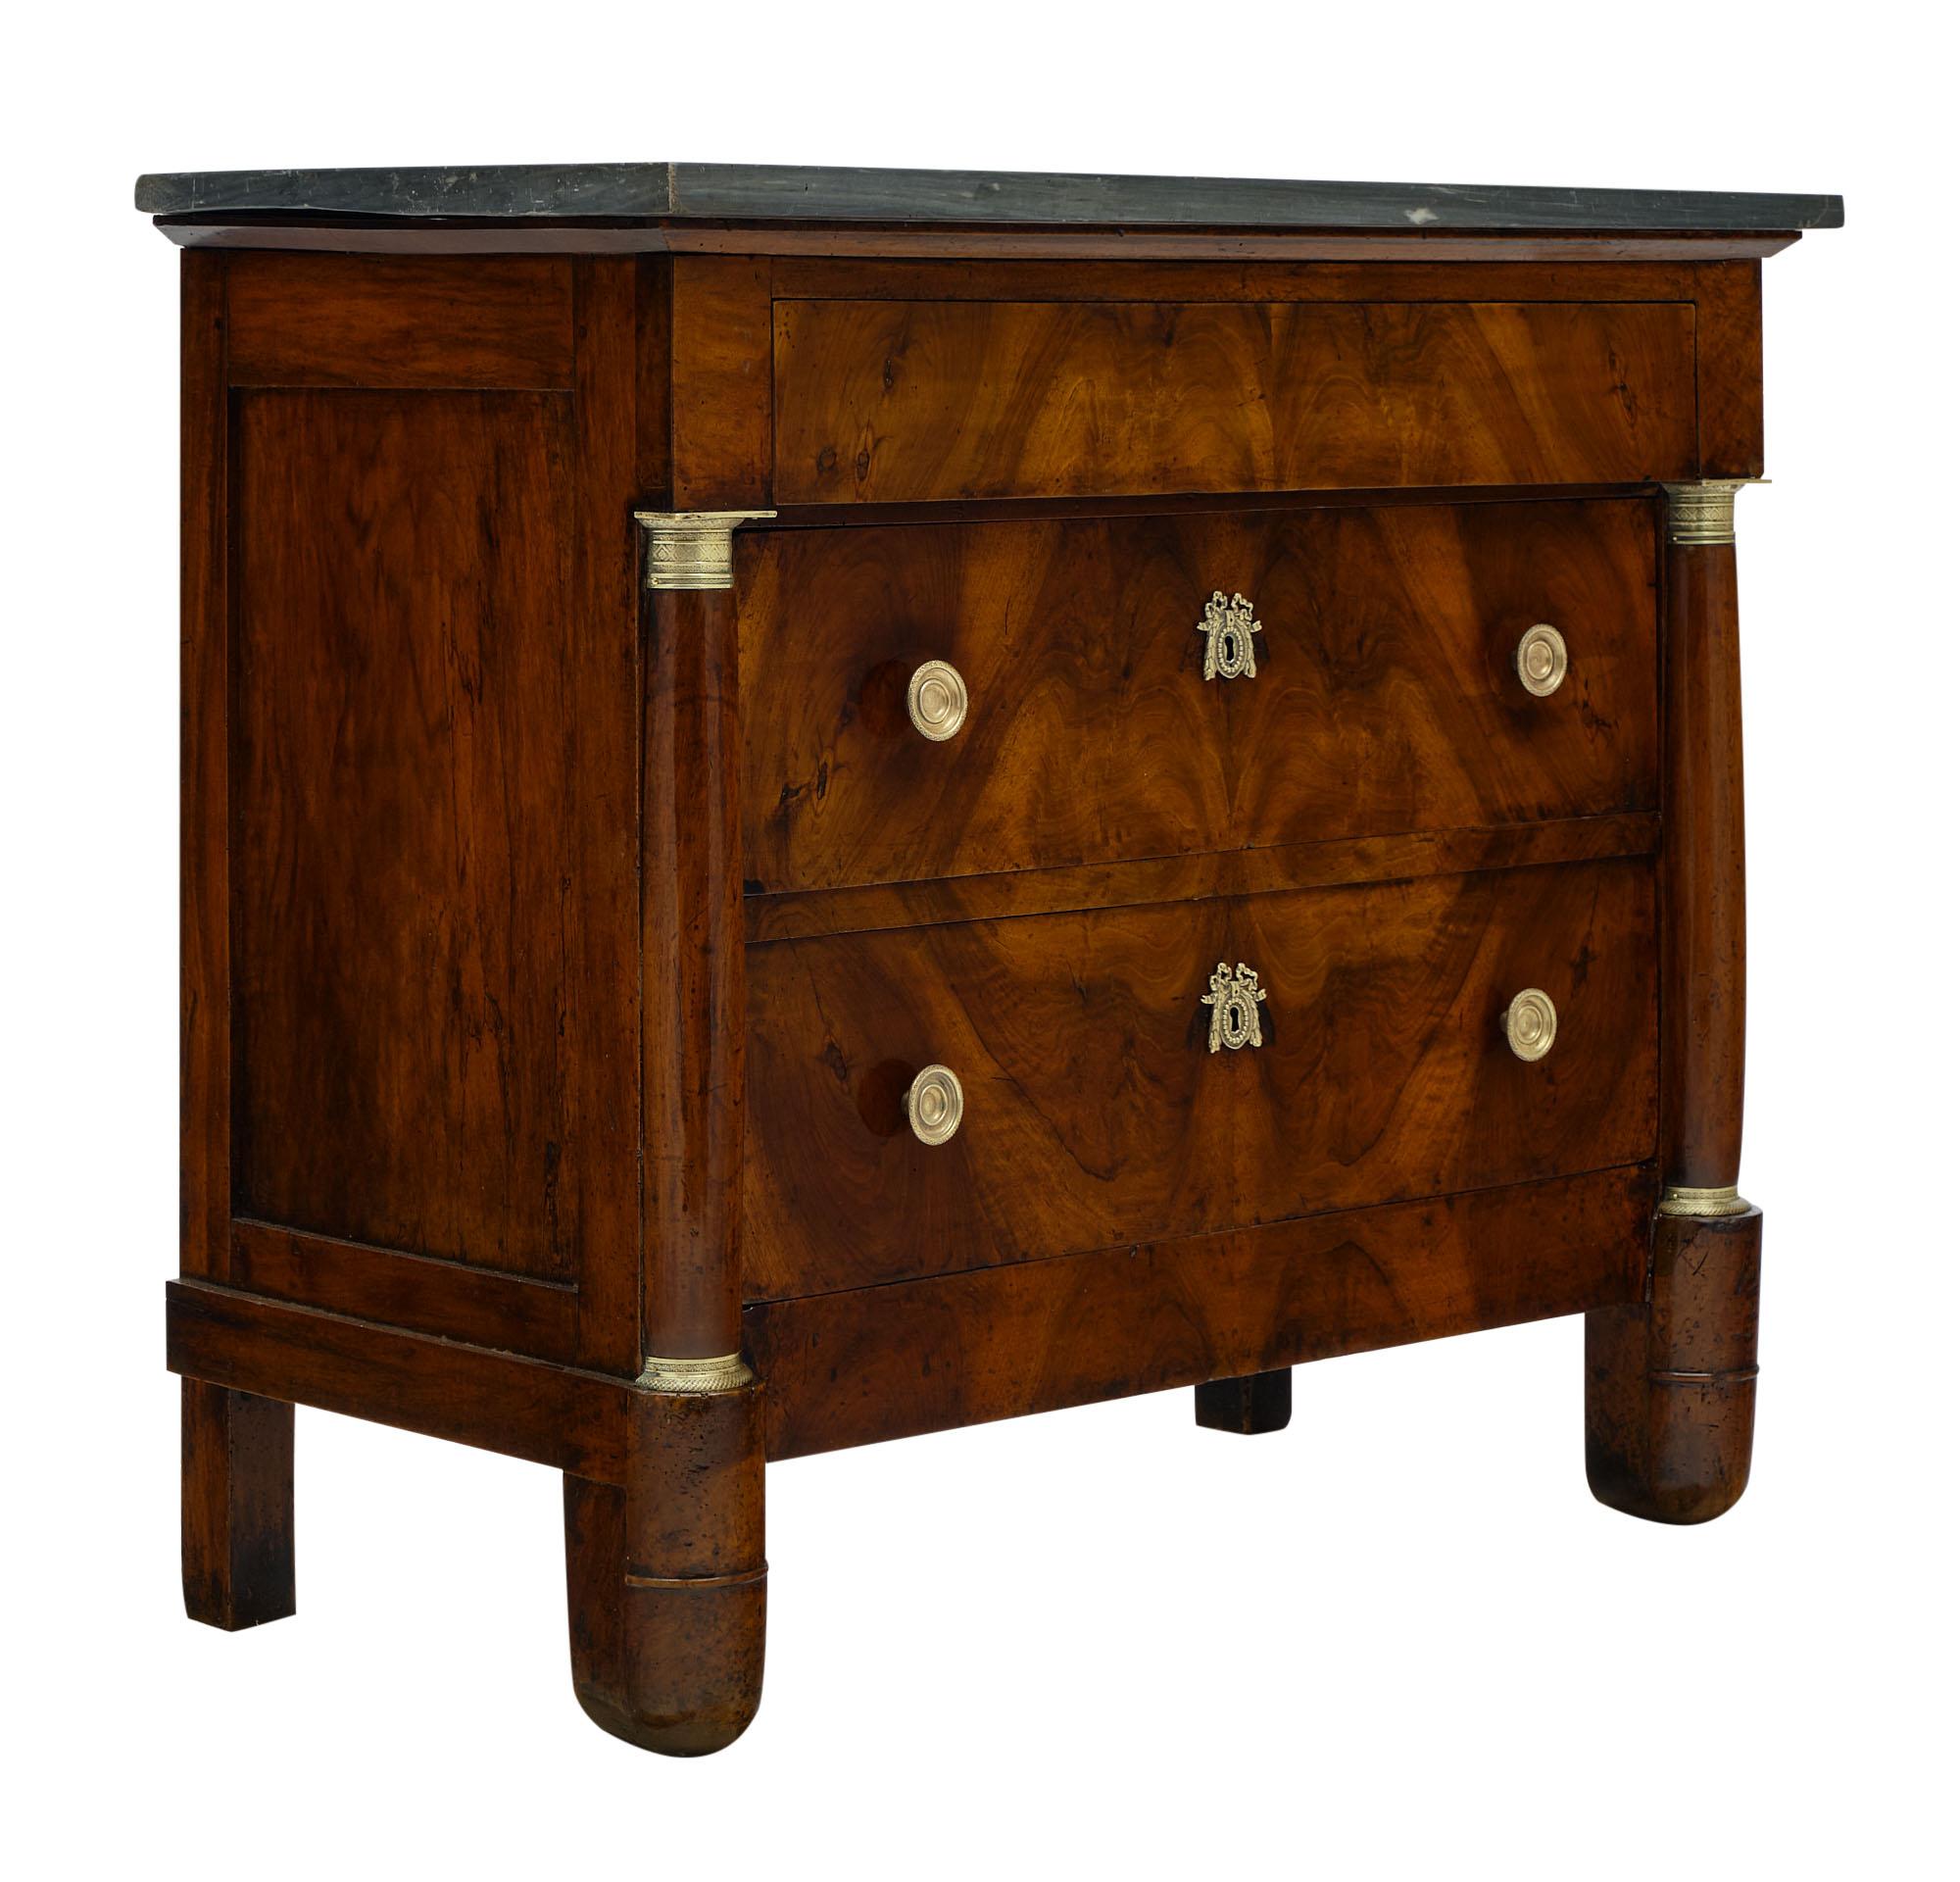 French Empire Period Chest of Drawers